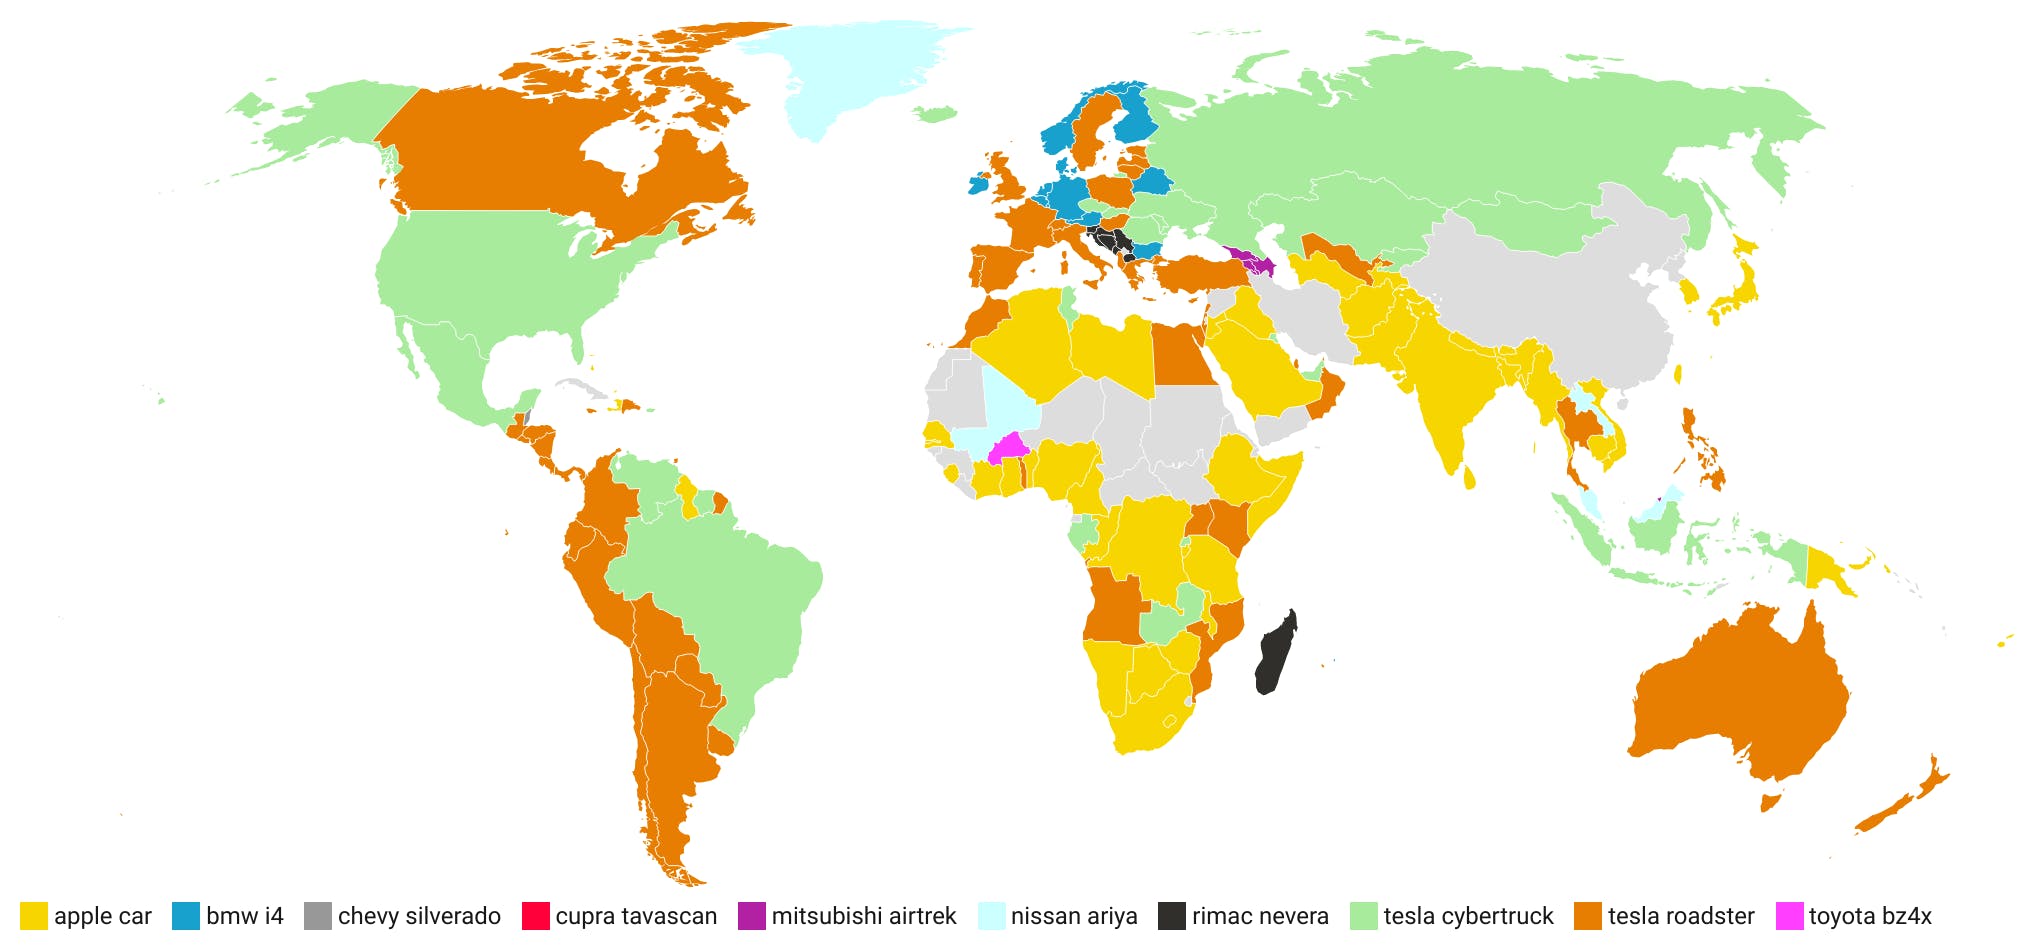 map of most searched for evs around the world